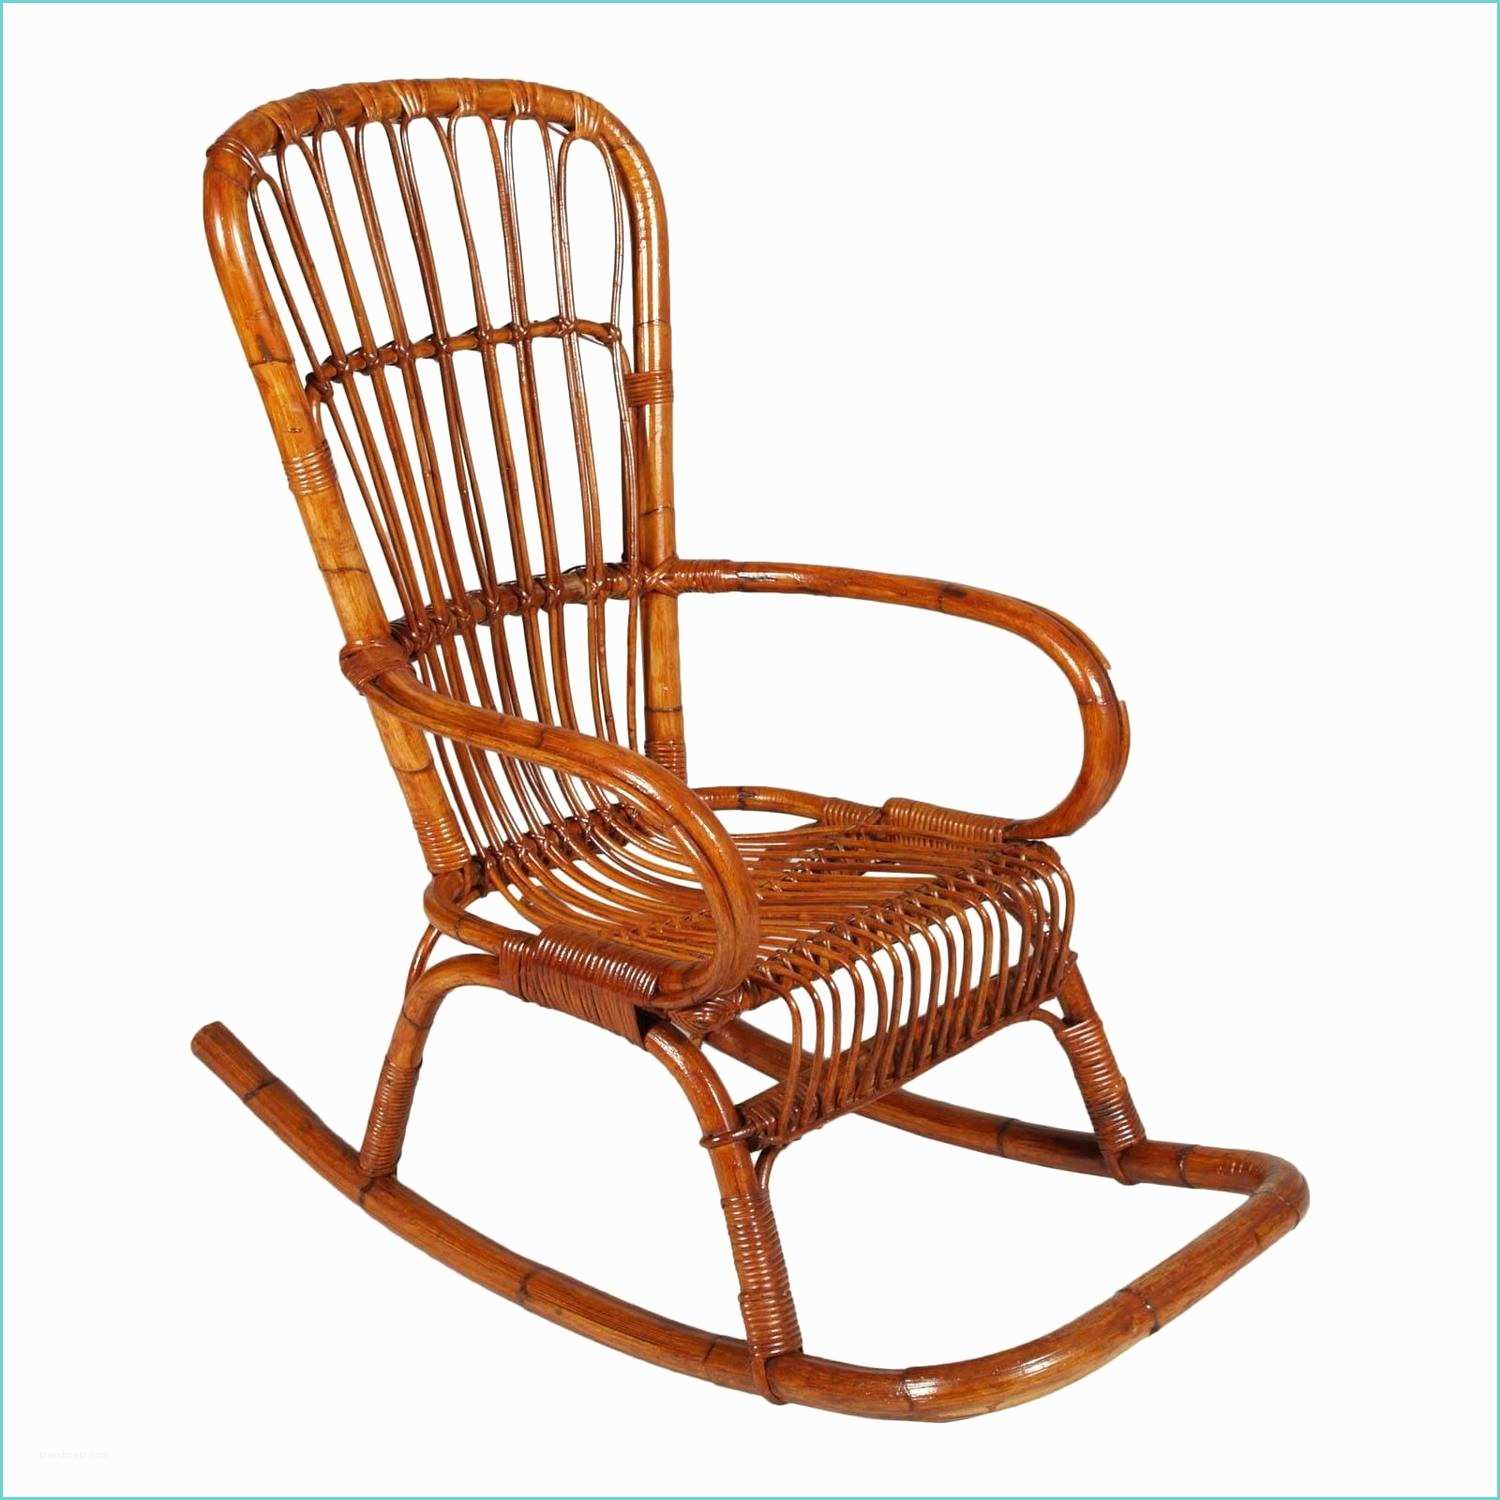 Originals Chairmakers Rocking Chair Rocking Chair Moderne Every Piece is Handbuilt by Shawn